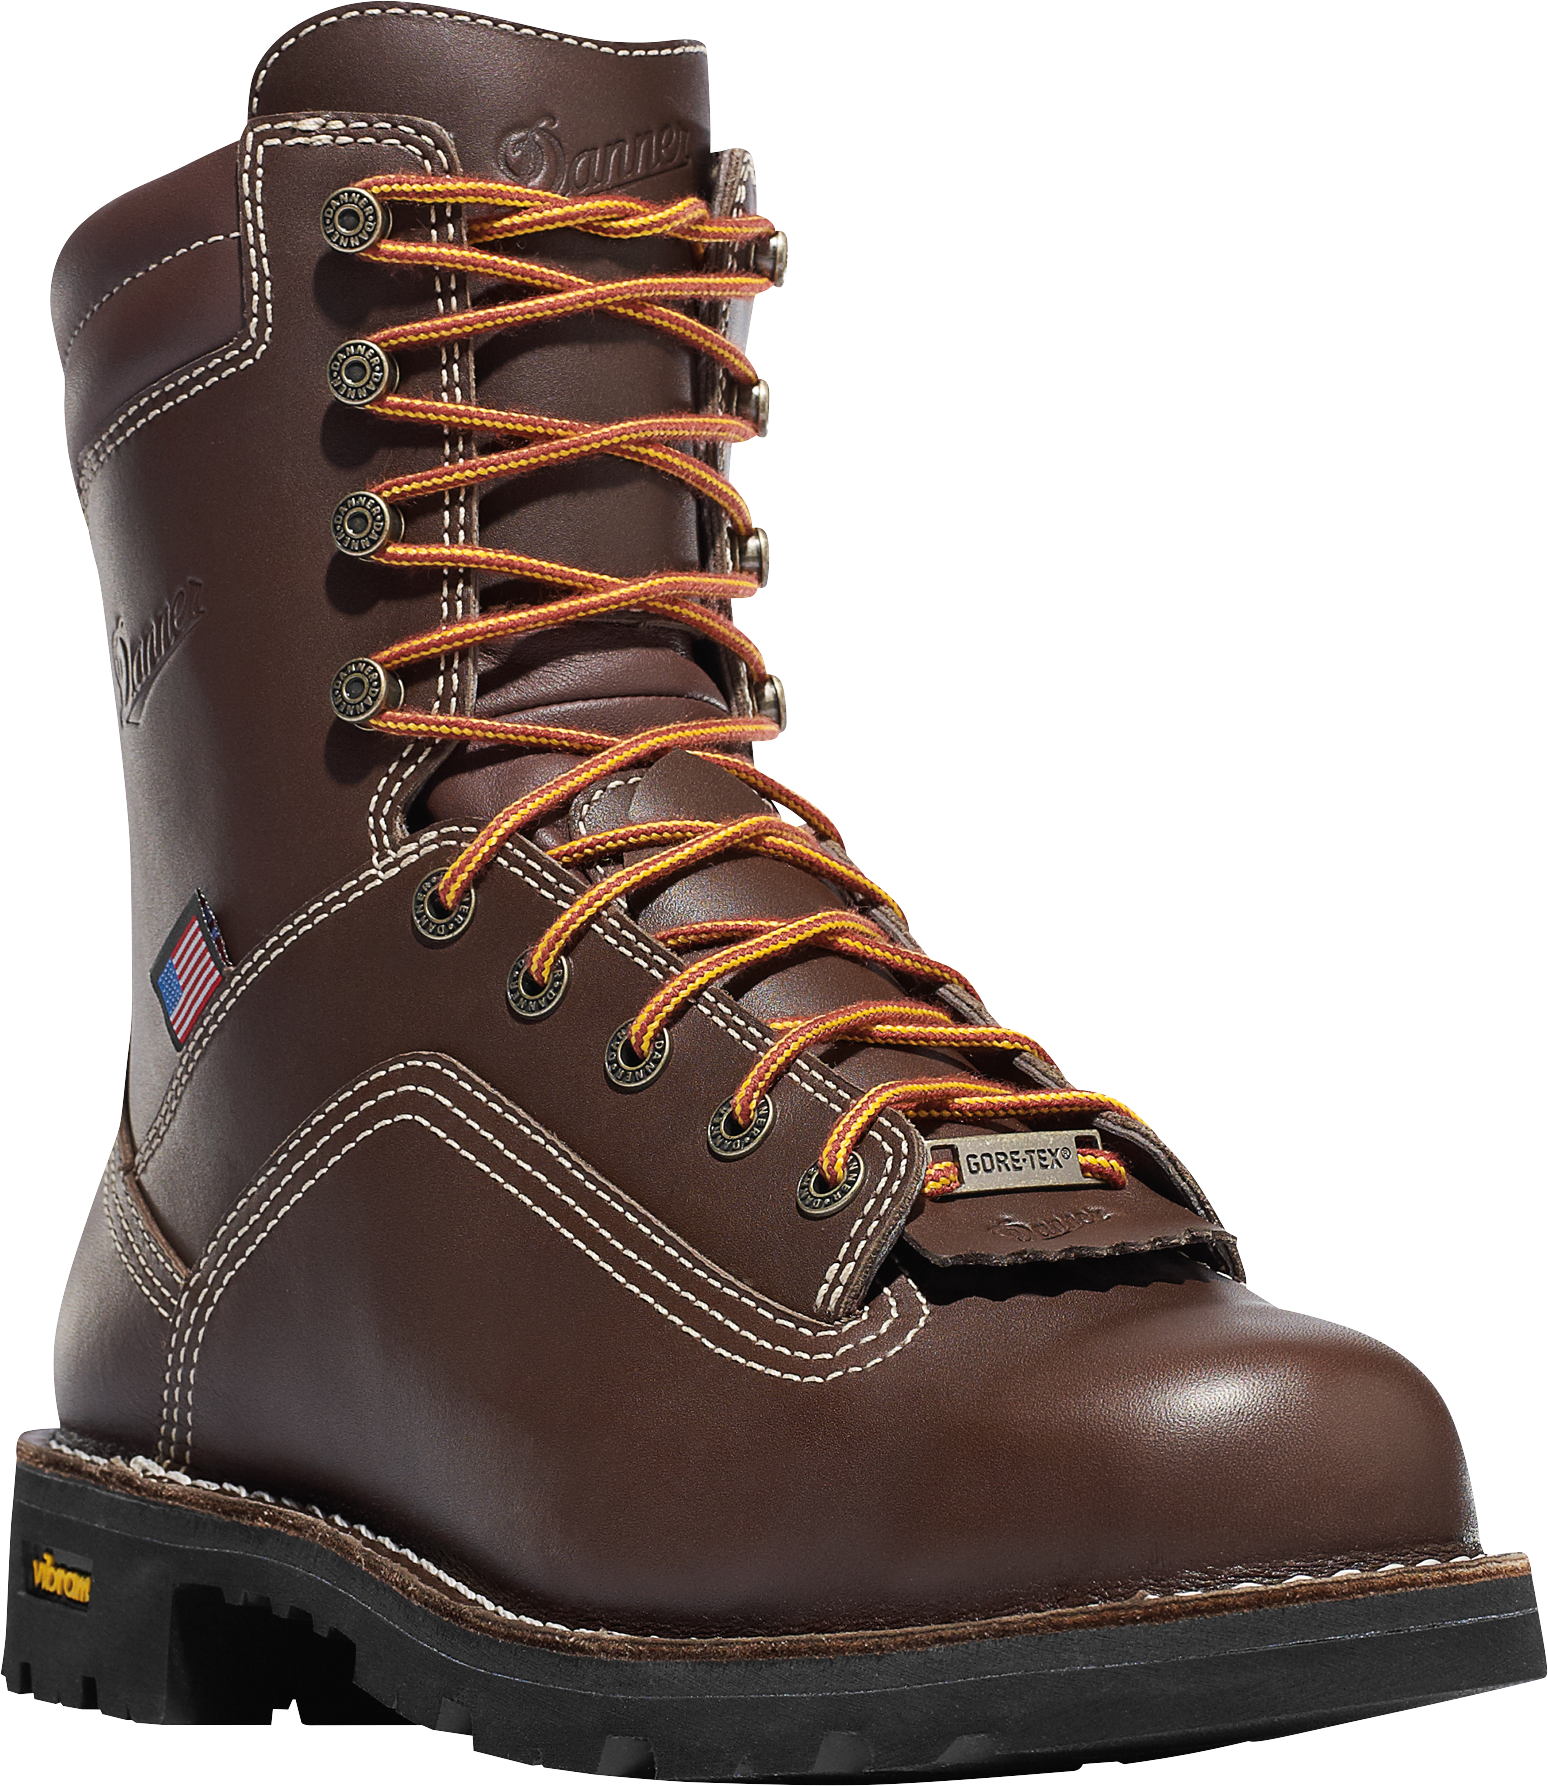 Danner Quarry USA Brown GORE-TEX Alloy Toe Work Boots for Men - Brown - 11W